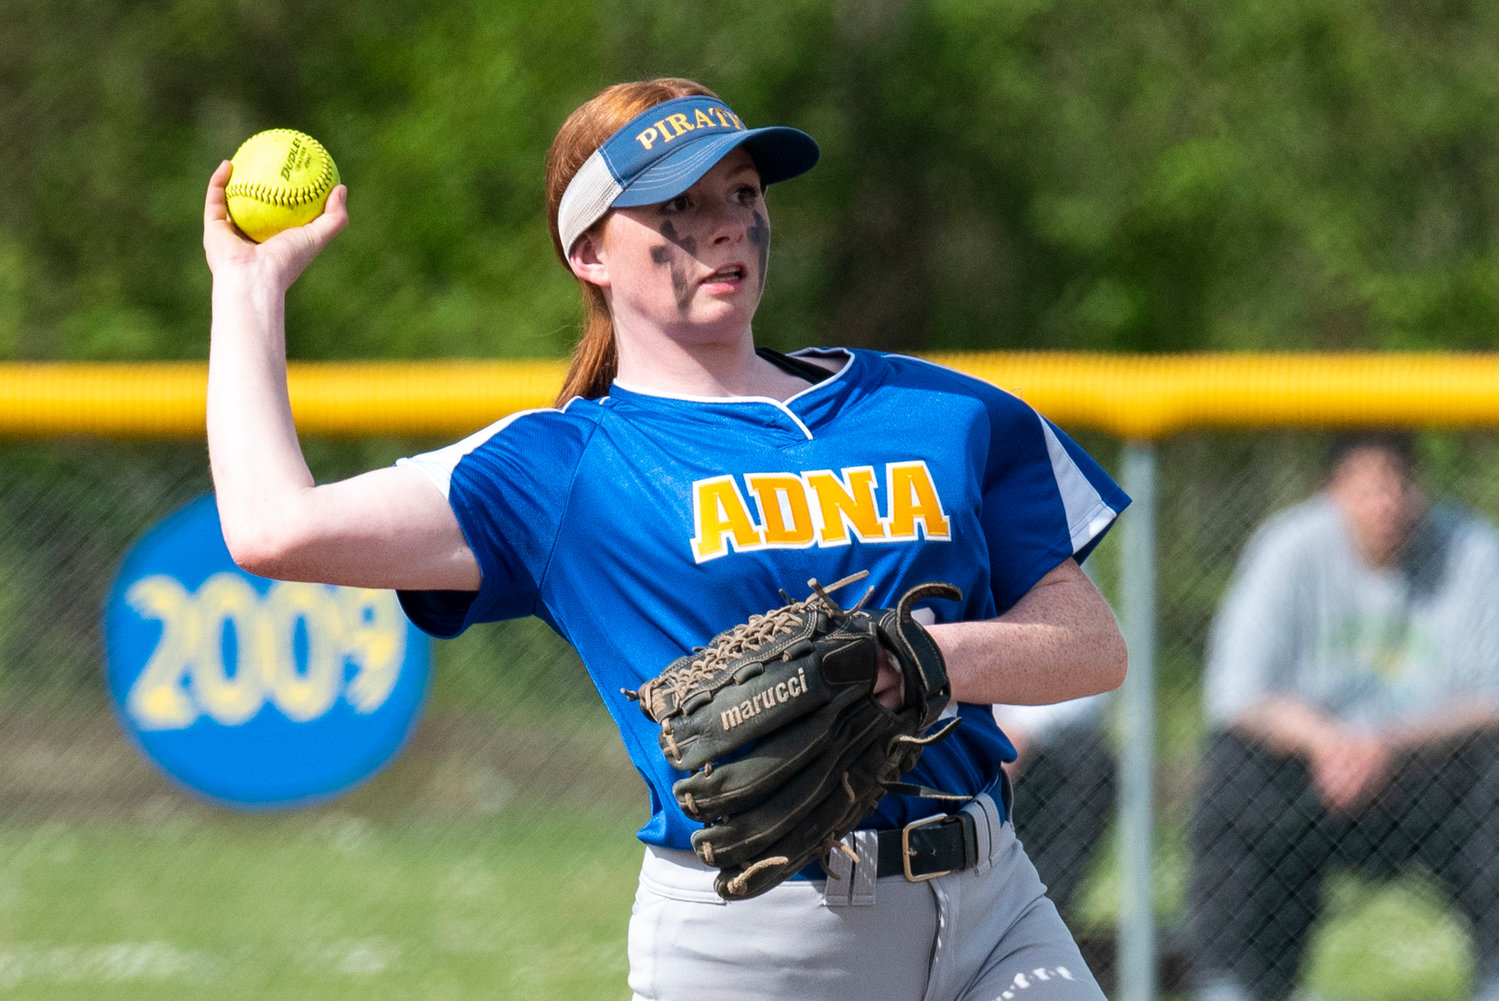 Adna second baseman Natalie Loose makes a throw to first base during a home game against Onalaska on May 4.